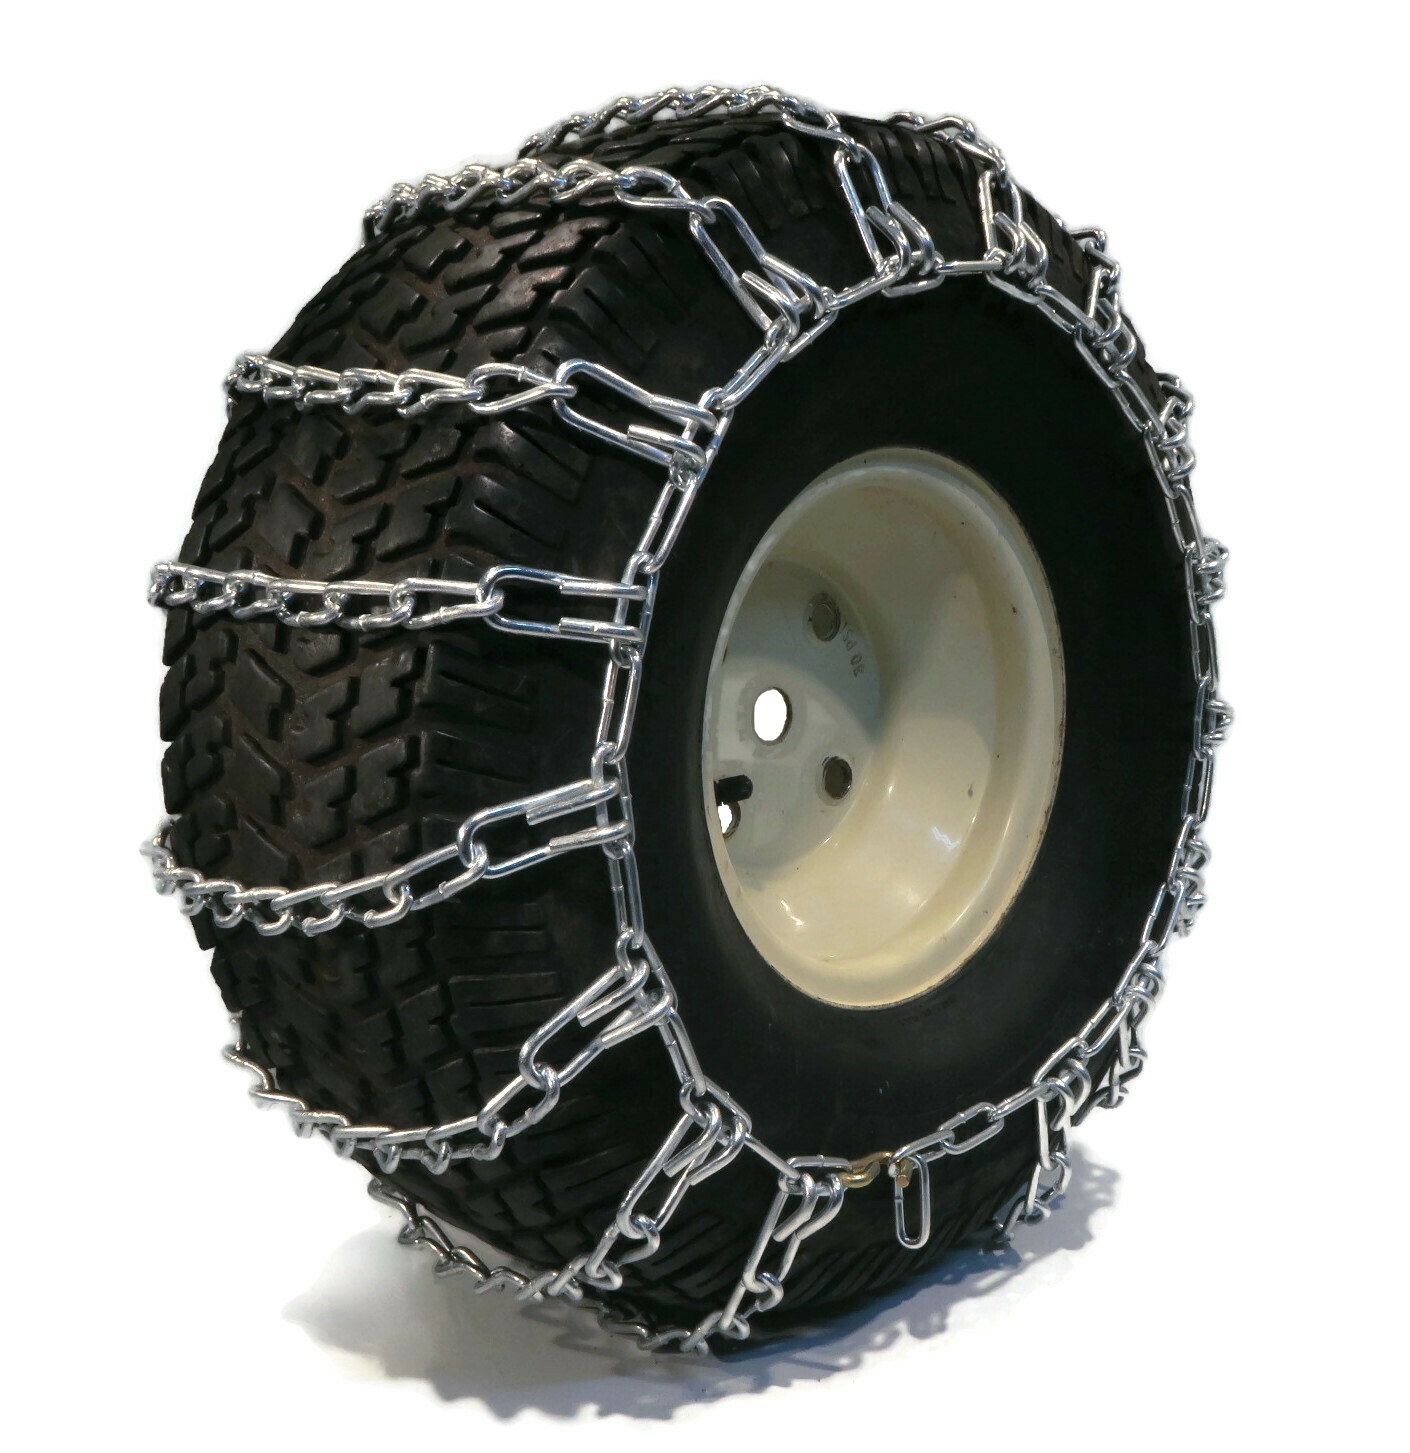 The ROP Shop | Pair 4 Link Tire Chains 29x12x15 for Sears Craftsman Lawn Mower Tractor Rider - image 3 of 6